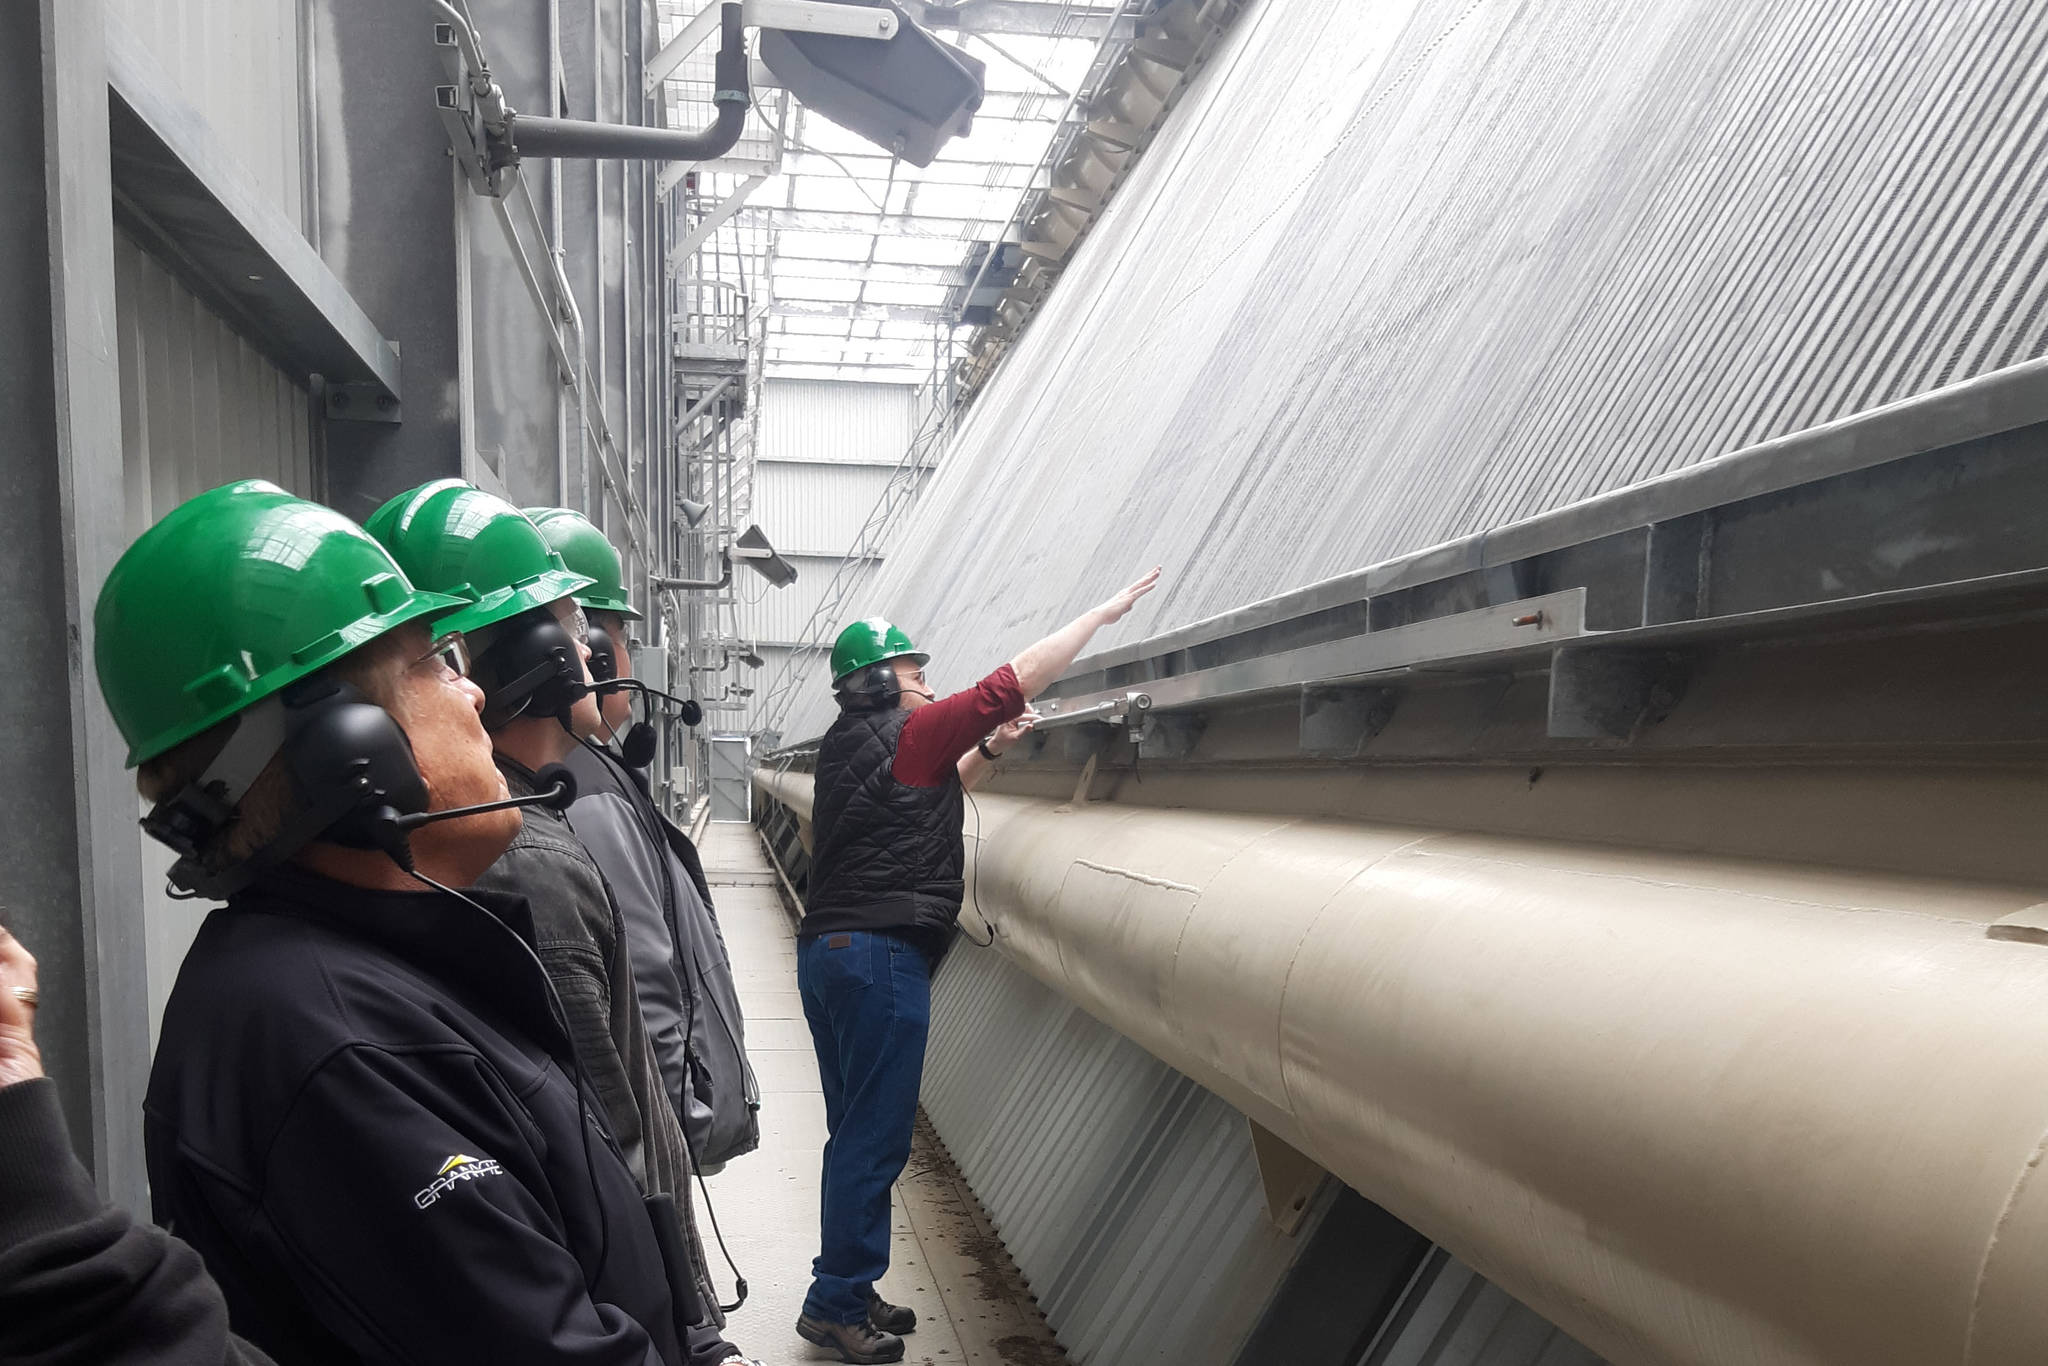 HEA Director of Power, Fuels and Dispatch Larry Jorgensen explains how the air-cooled condenser at the Nikiski Power Plant operates during a tour in Nikiski, Alaska on May 2, 2019. (Photo by Brian Mazurek/Peninsula Clarion)